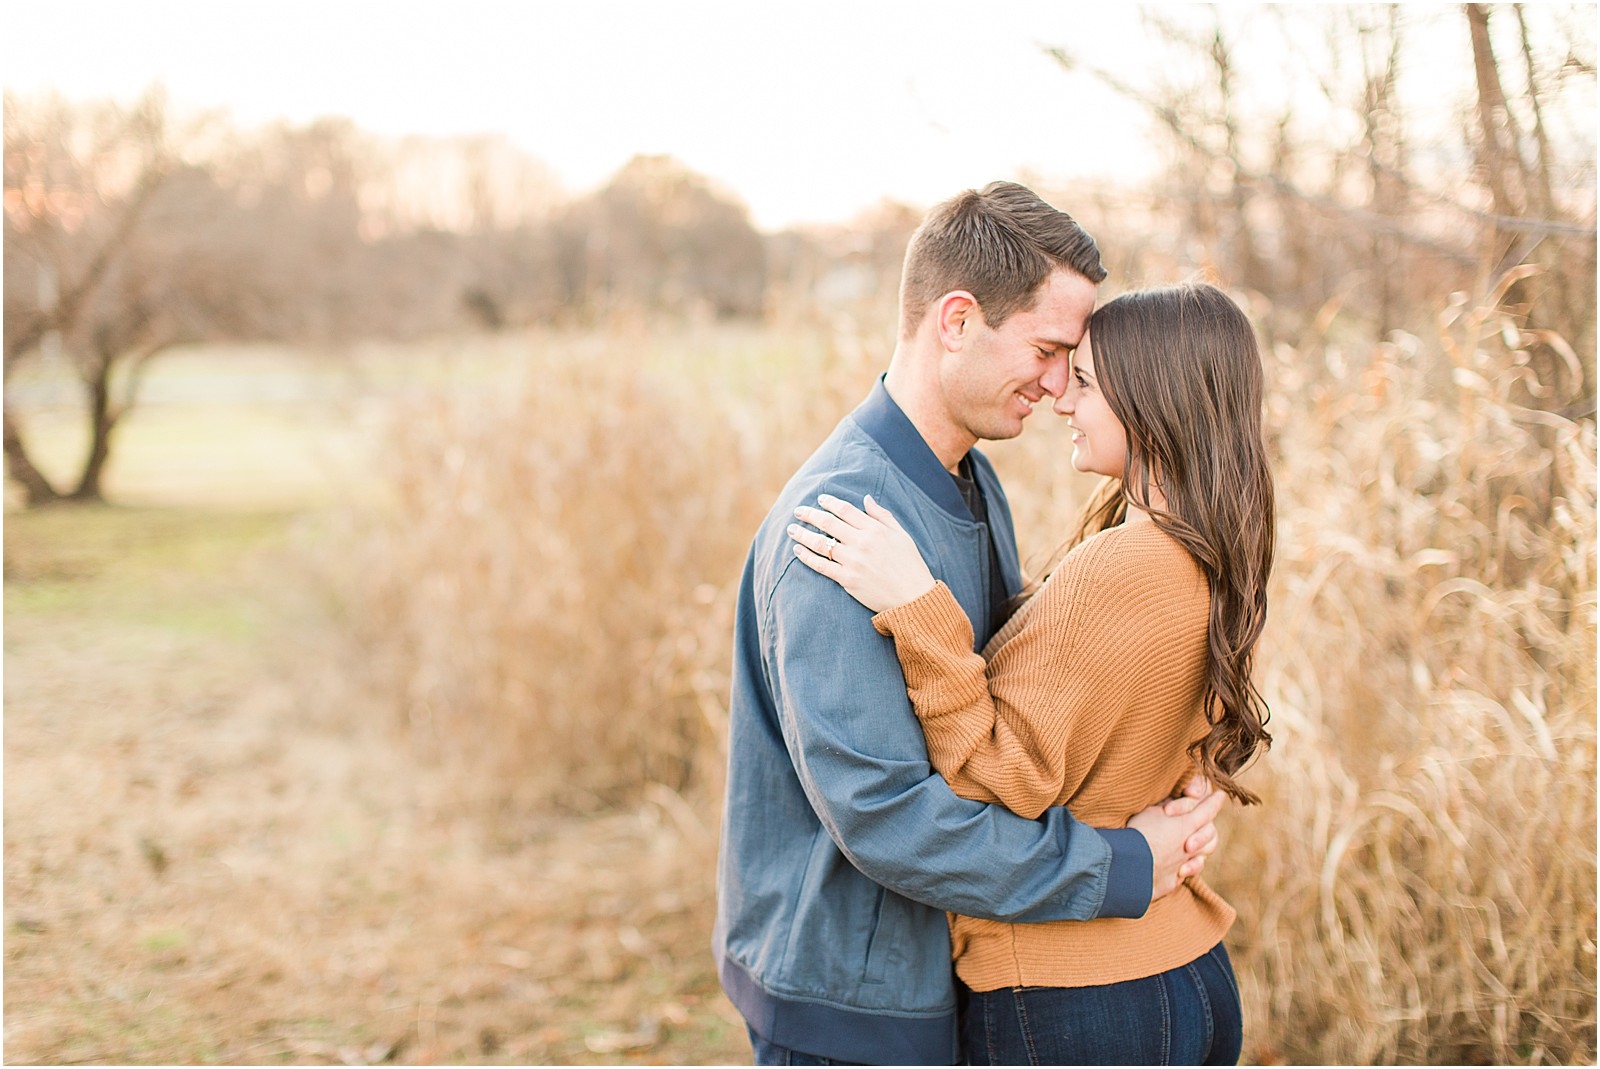 Kaley and Devon's fall Evansville Indiana engagement session. | #fallengagementsession #evansvilleindiana #evansvilleindianawedding | 0042.jpg